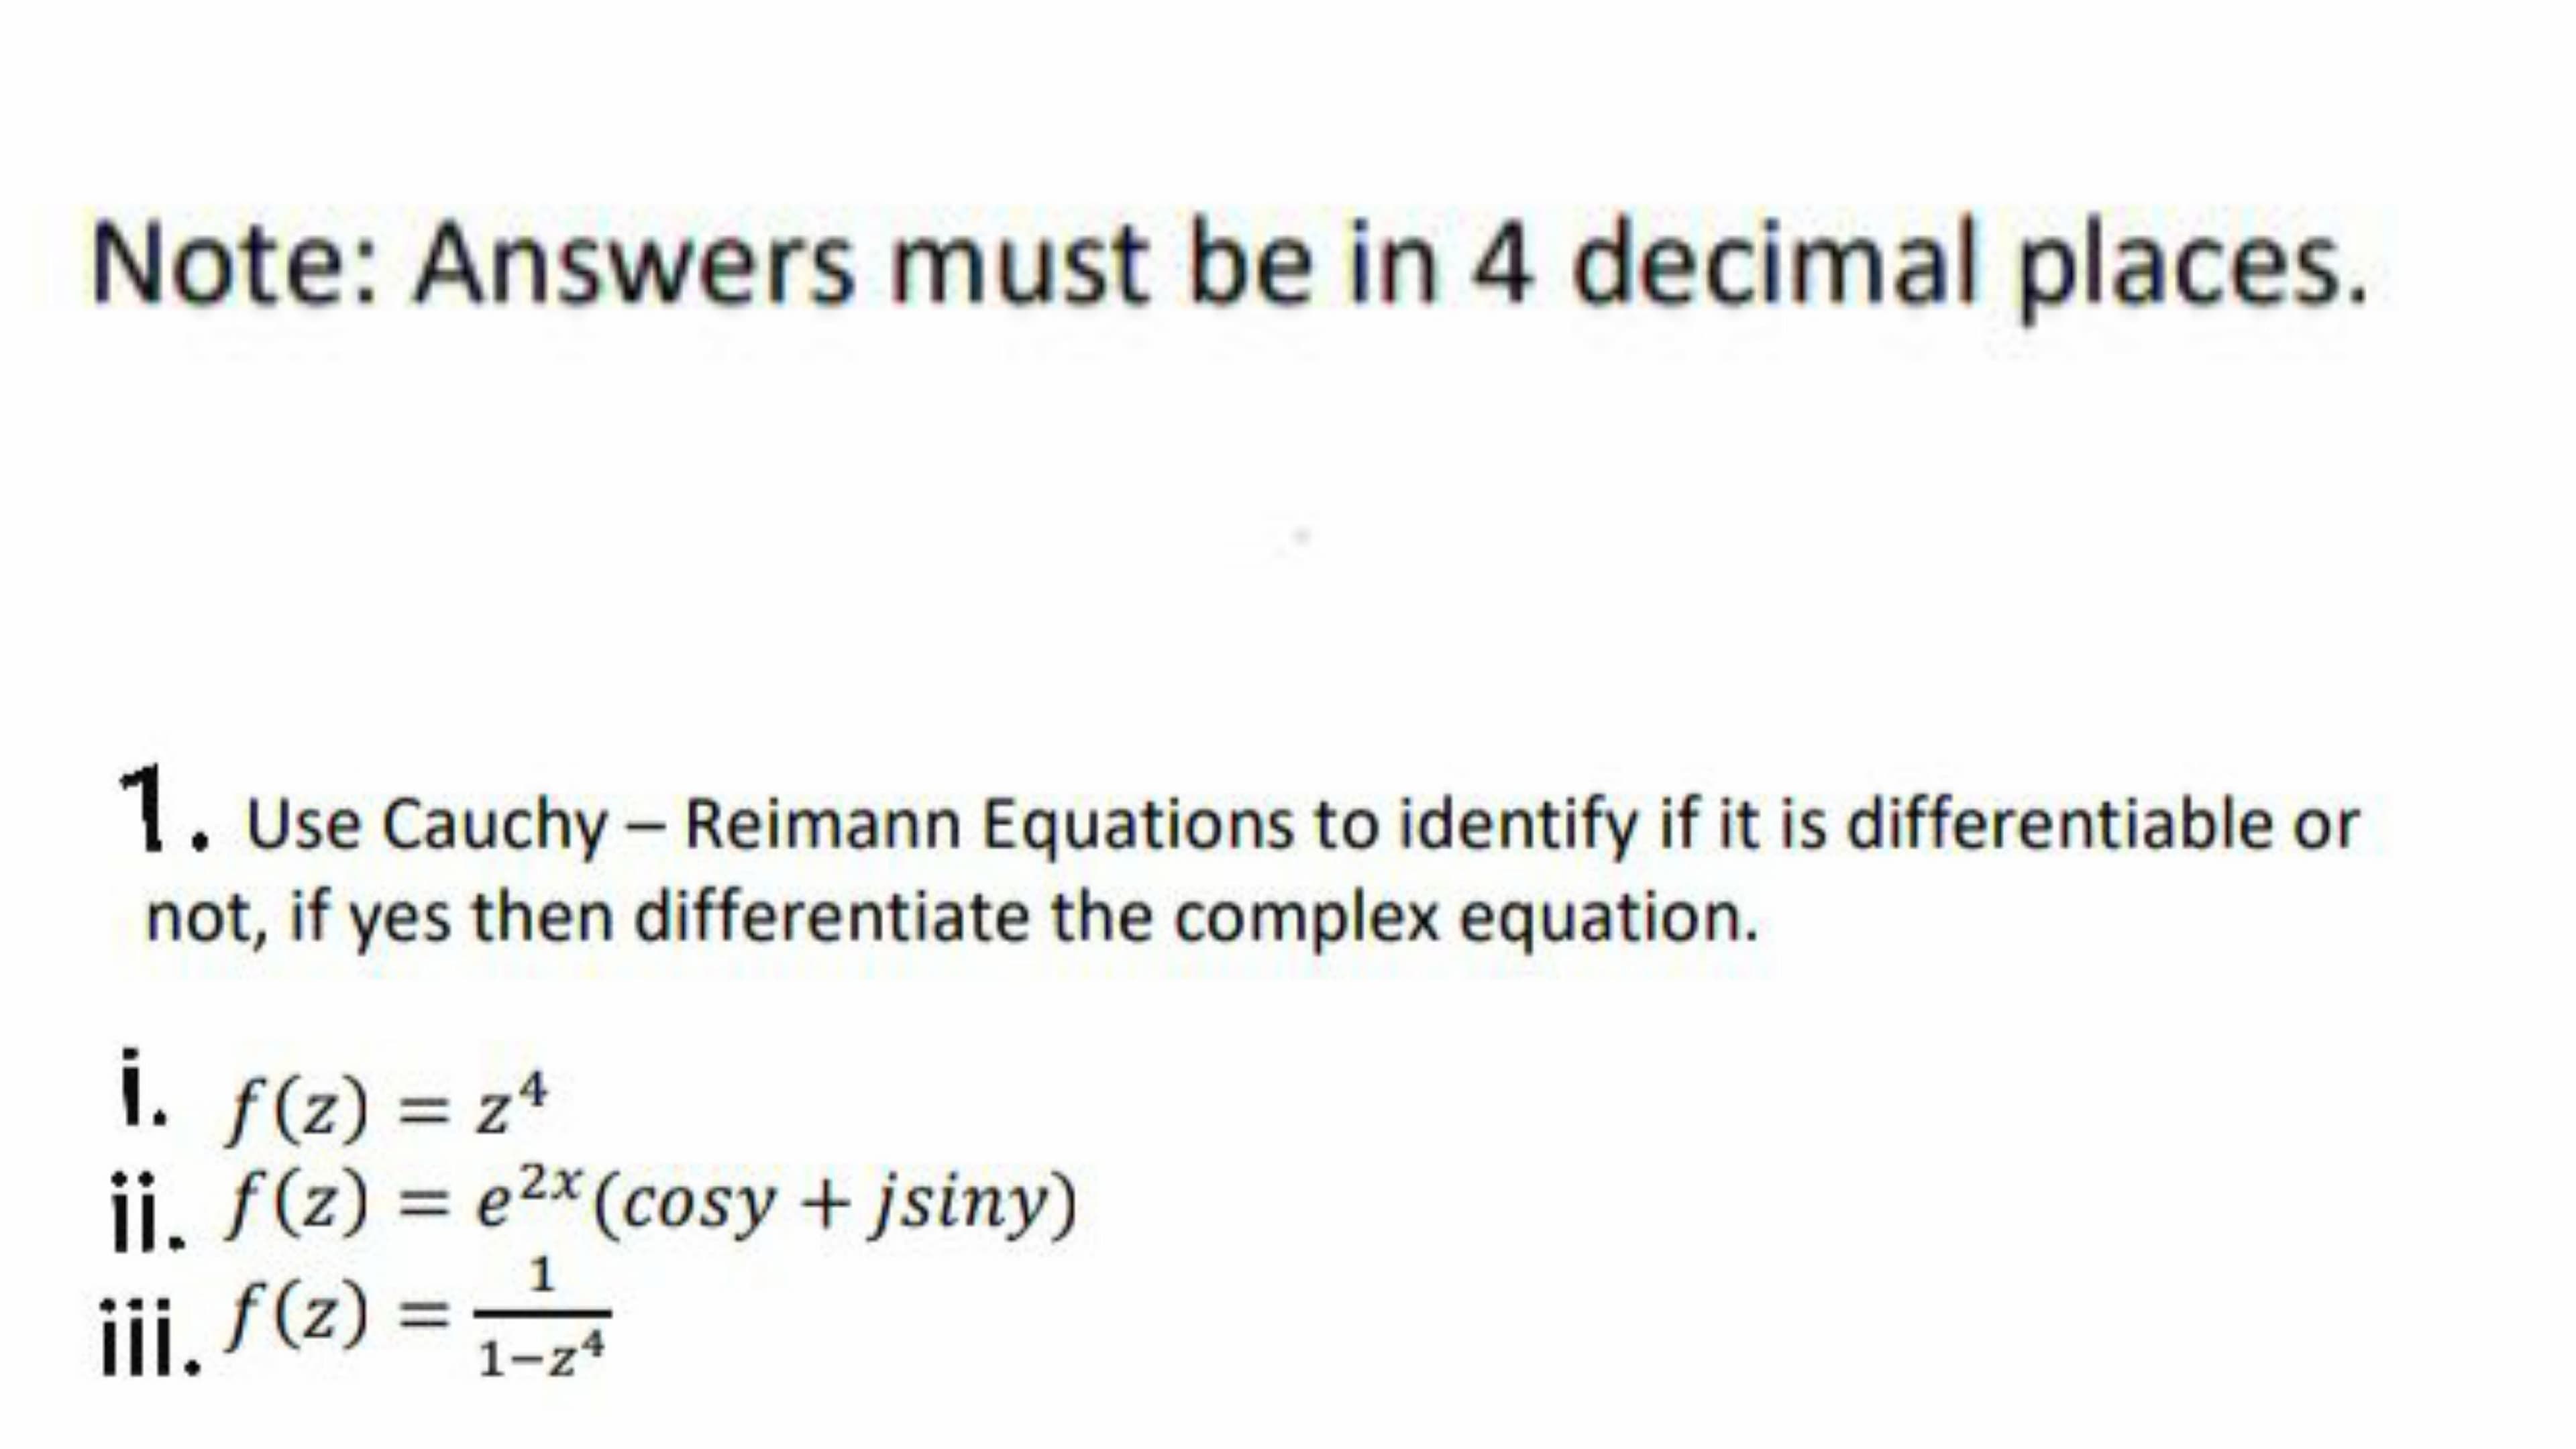 Note: Answers must be in 4 decimal places.
1. Use Cauchy - Reimann Equations to identify if it is differentiable or
not, if yes then differentiate the complex equation.
i. f(z) = z*
ji, f(z) = e2* (cosy + jsiny)
iii, f(z) =
%3D
1
1-z4
